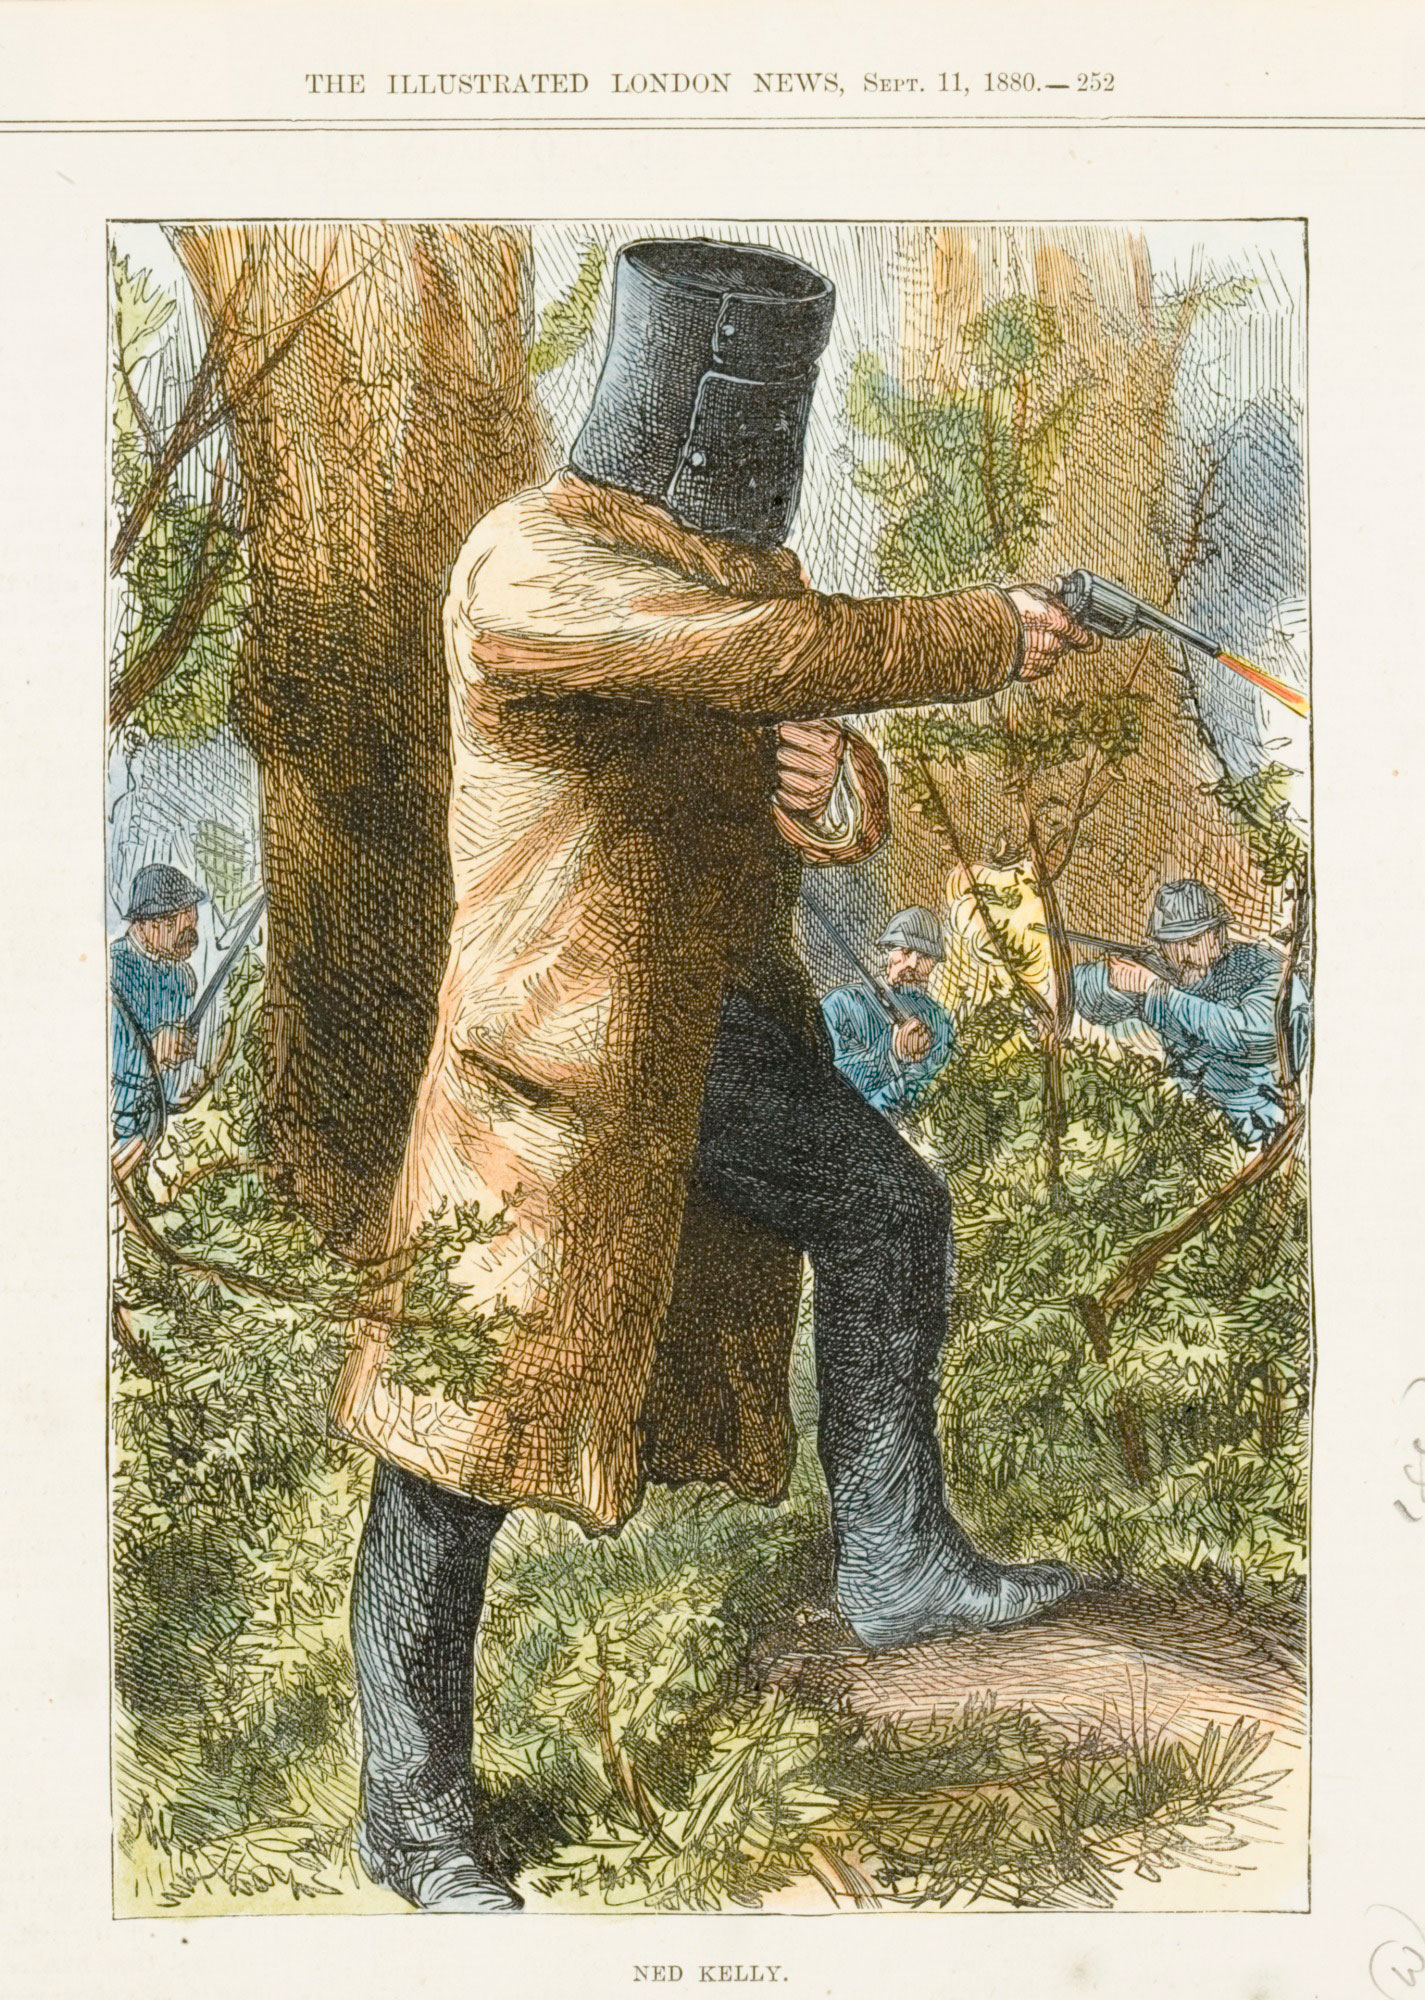 Woodcut of Ned Kelly, The Illustrated London News.